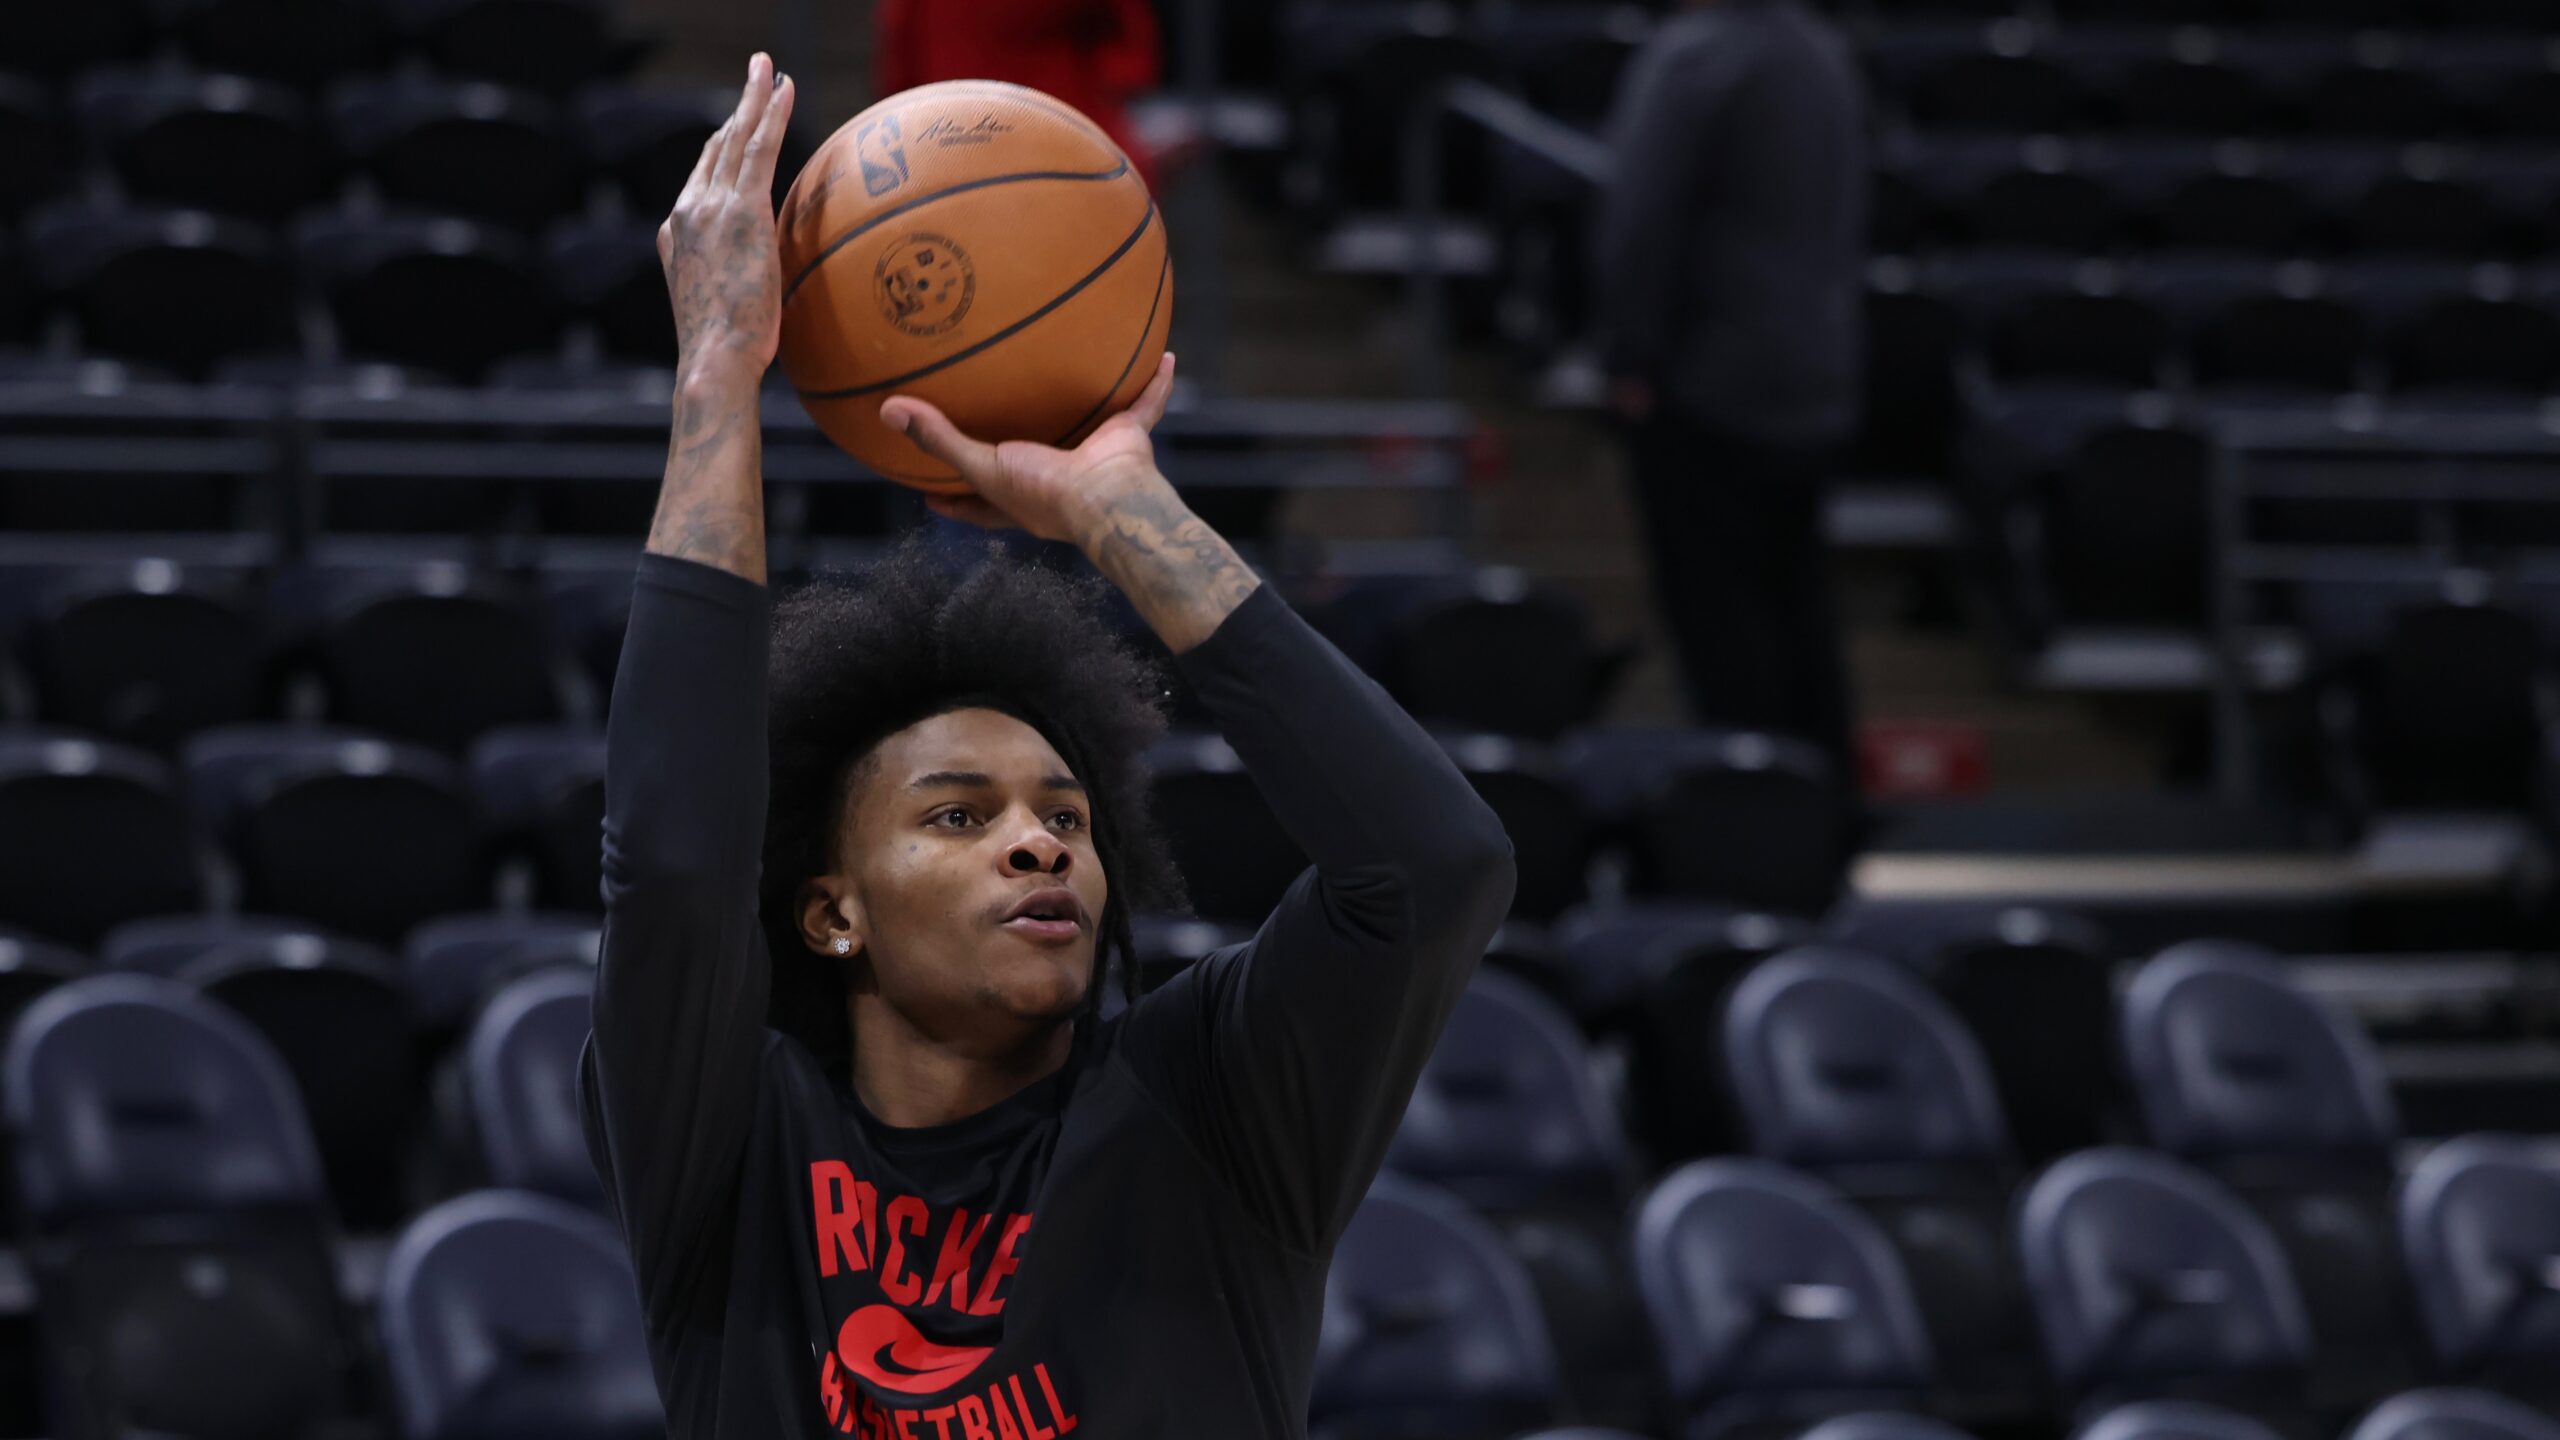 Rockets' Kevin Porter Jr. Not Listed on Injury Report Ahead of Friday's Matchup with Magic